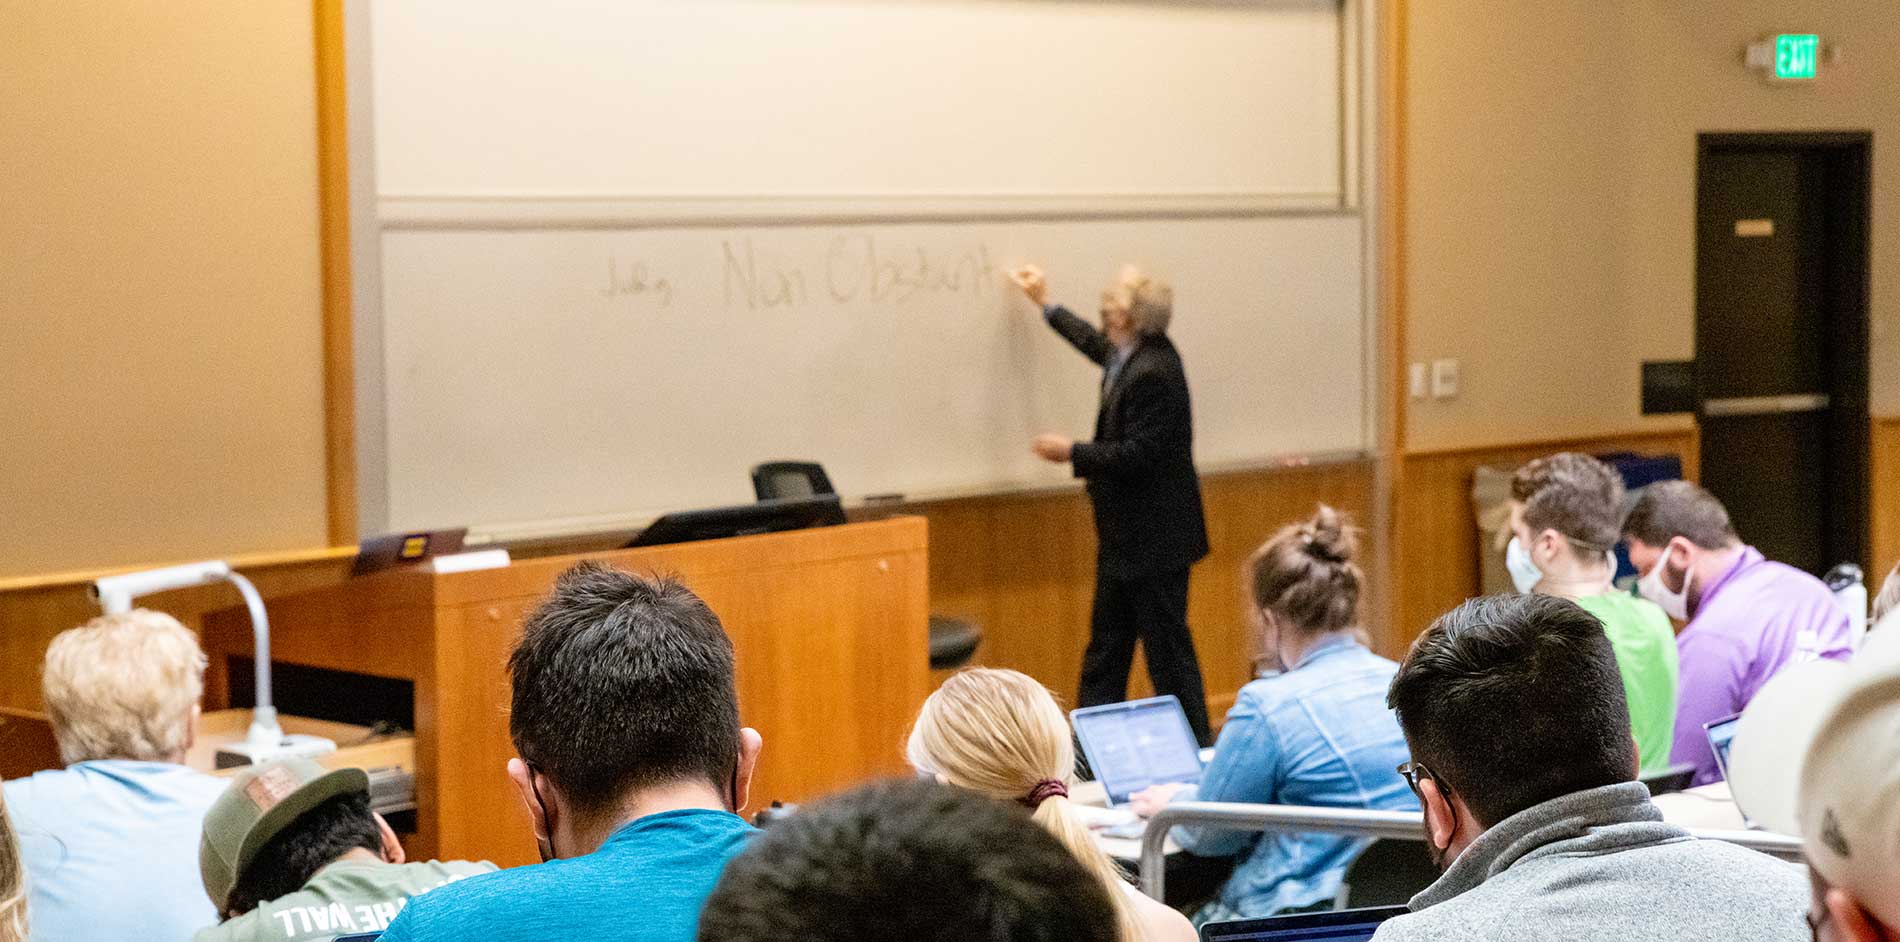 Students in auditorium class with professor writing on white board